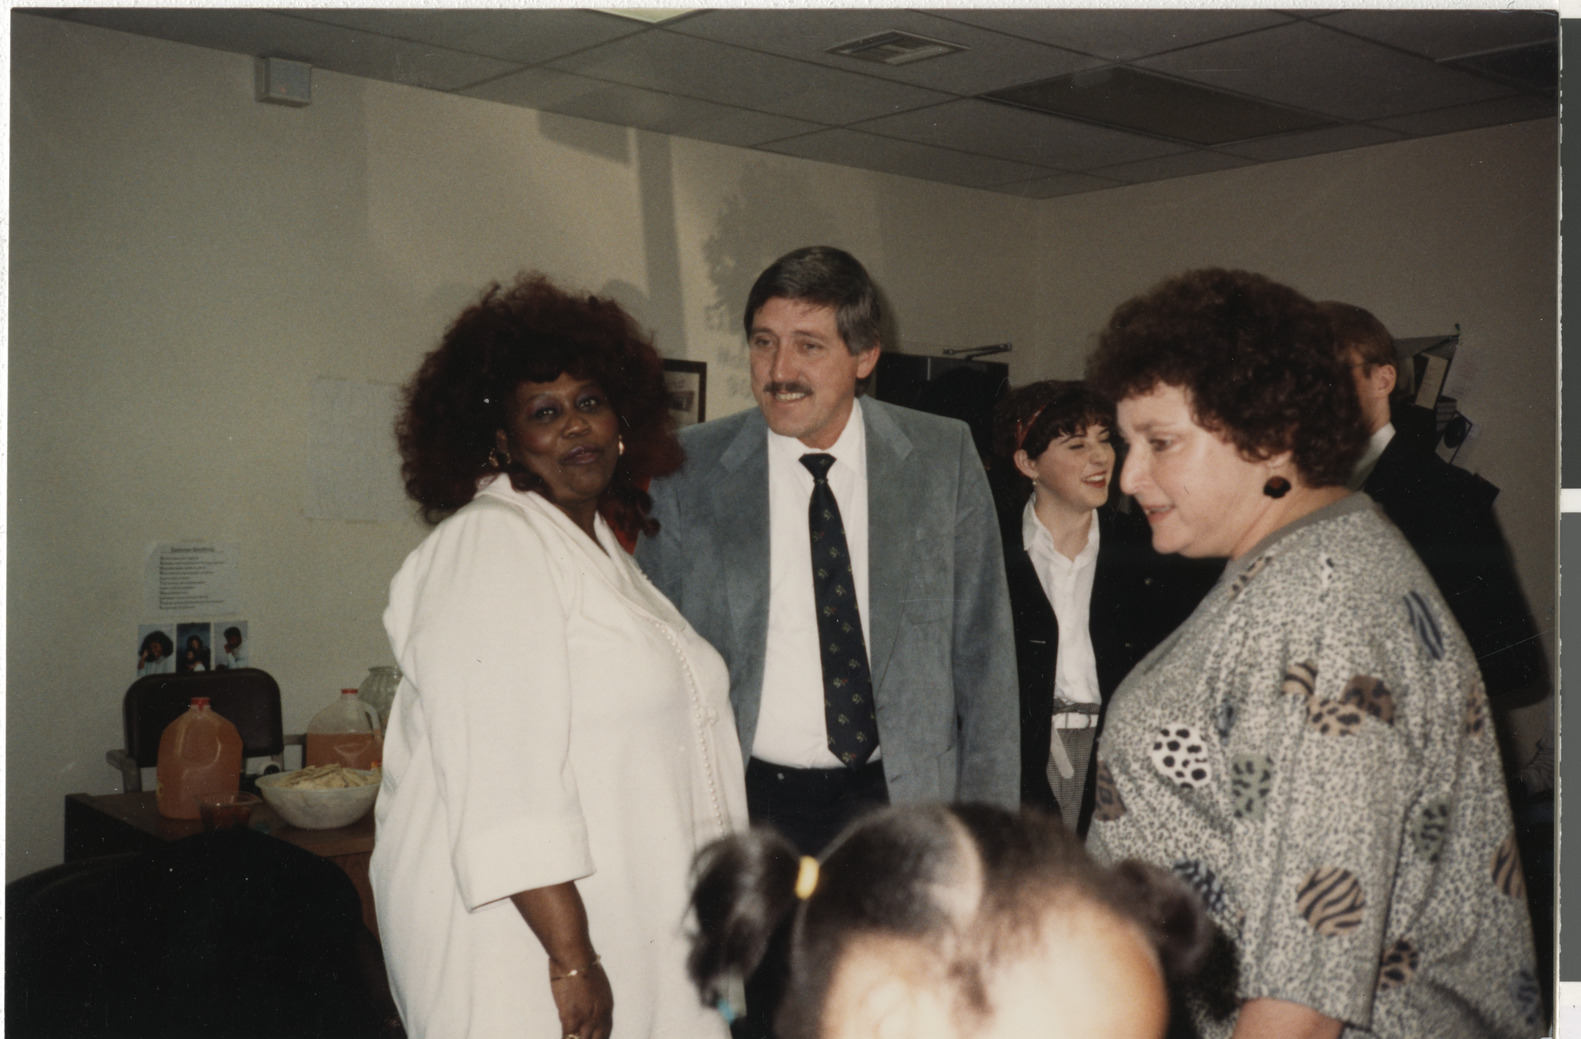 Christmas party, Image 08